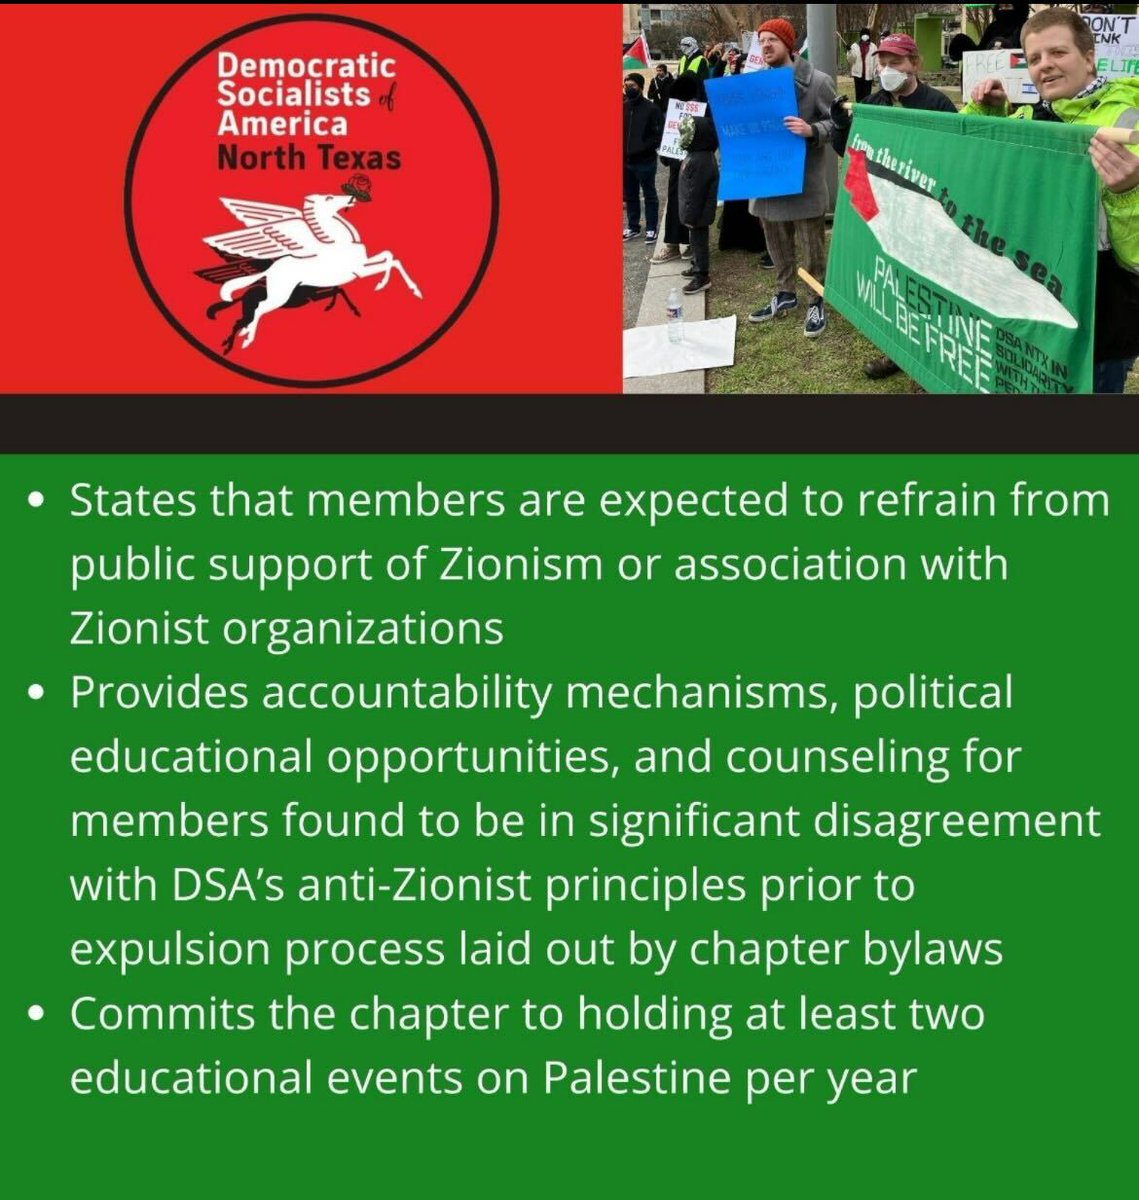 DSA North Texas passed our strongest commitment to anti-Zionist principles yet at our March general meeting. See the graphic for details.